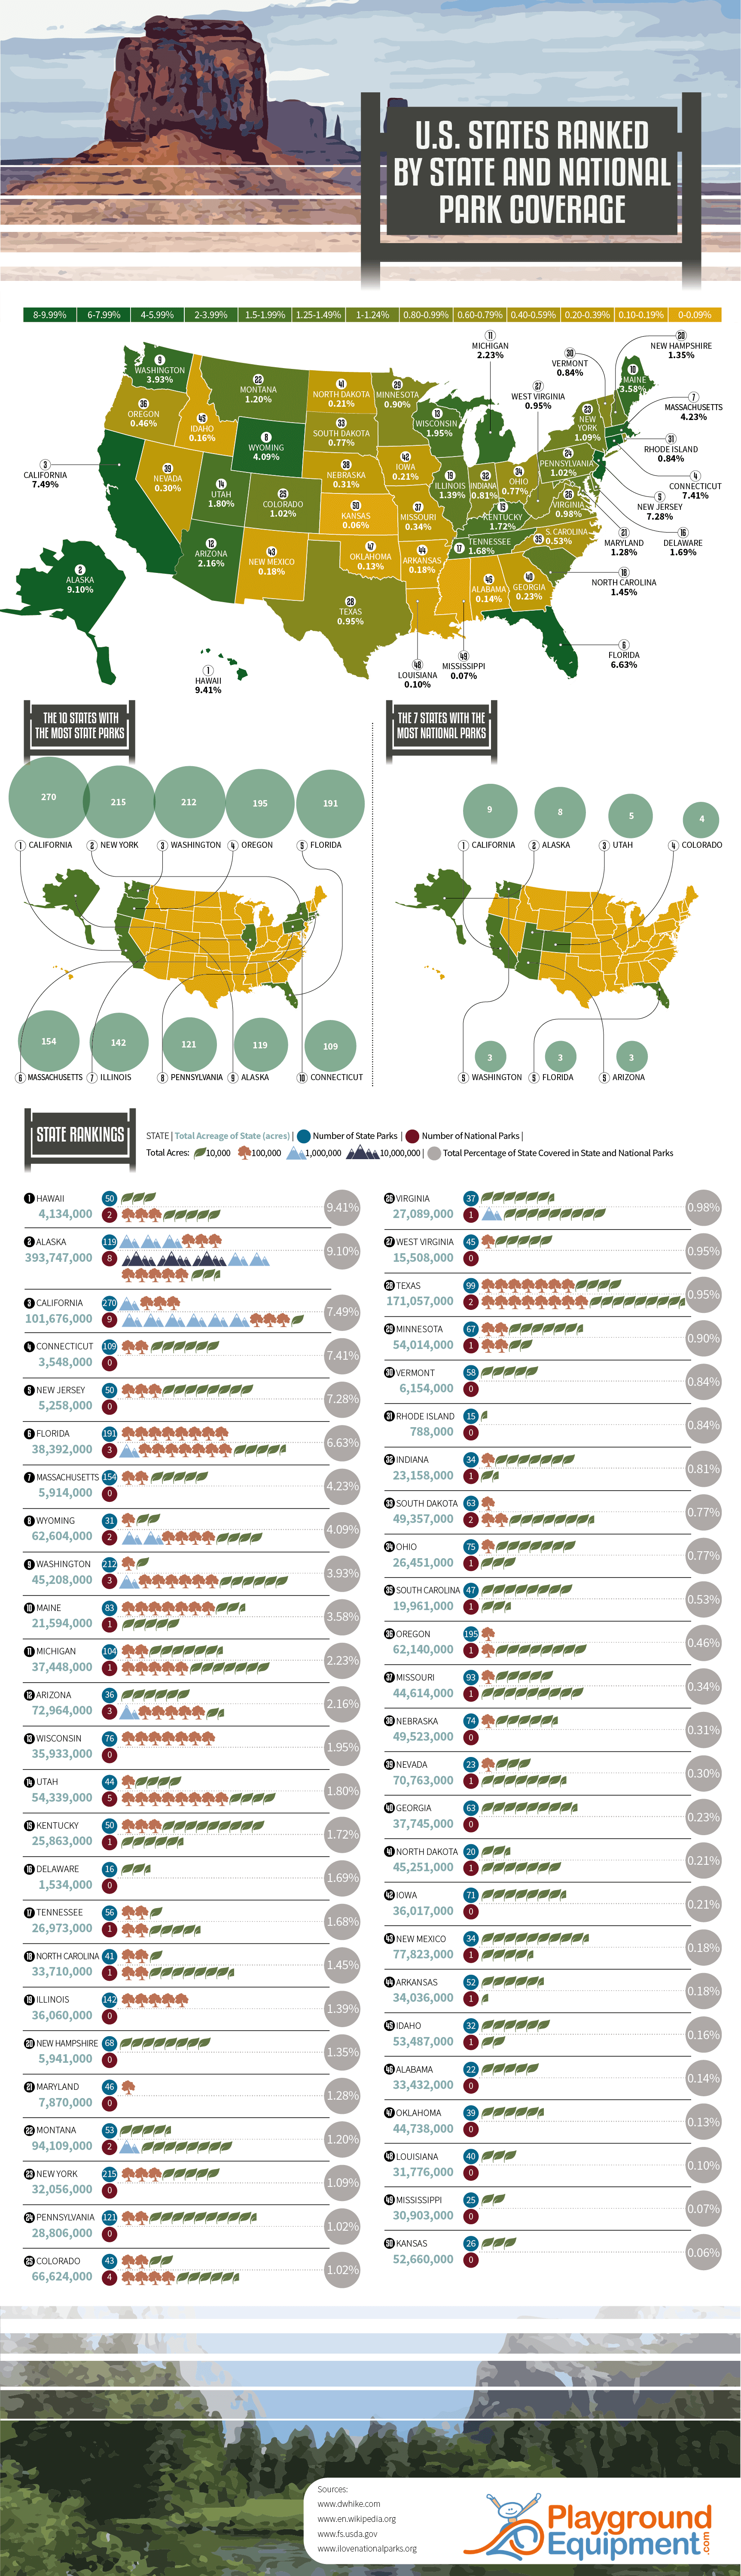 U.S. States Ranked by State and National Park Coverage - PlaygroundEquipment.com - Infographic